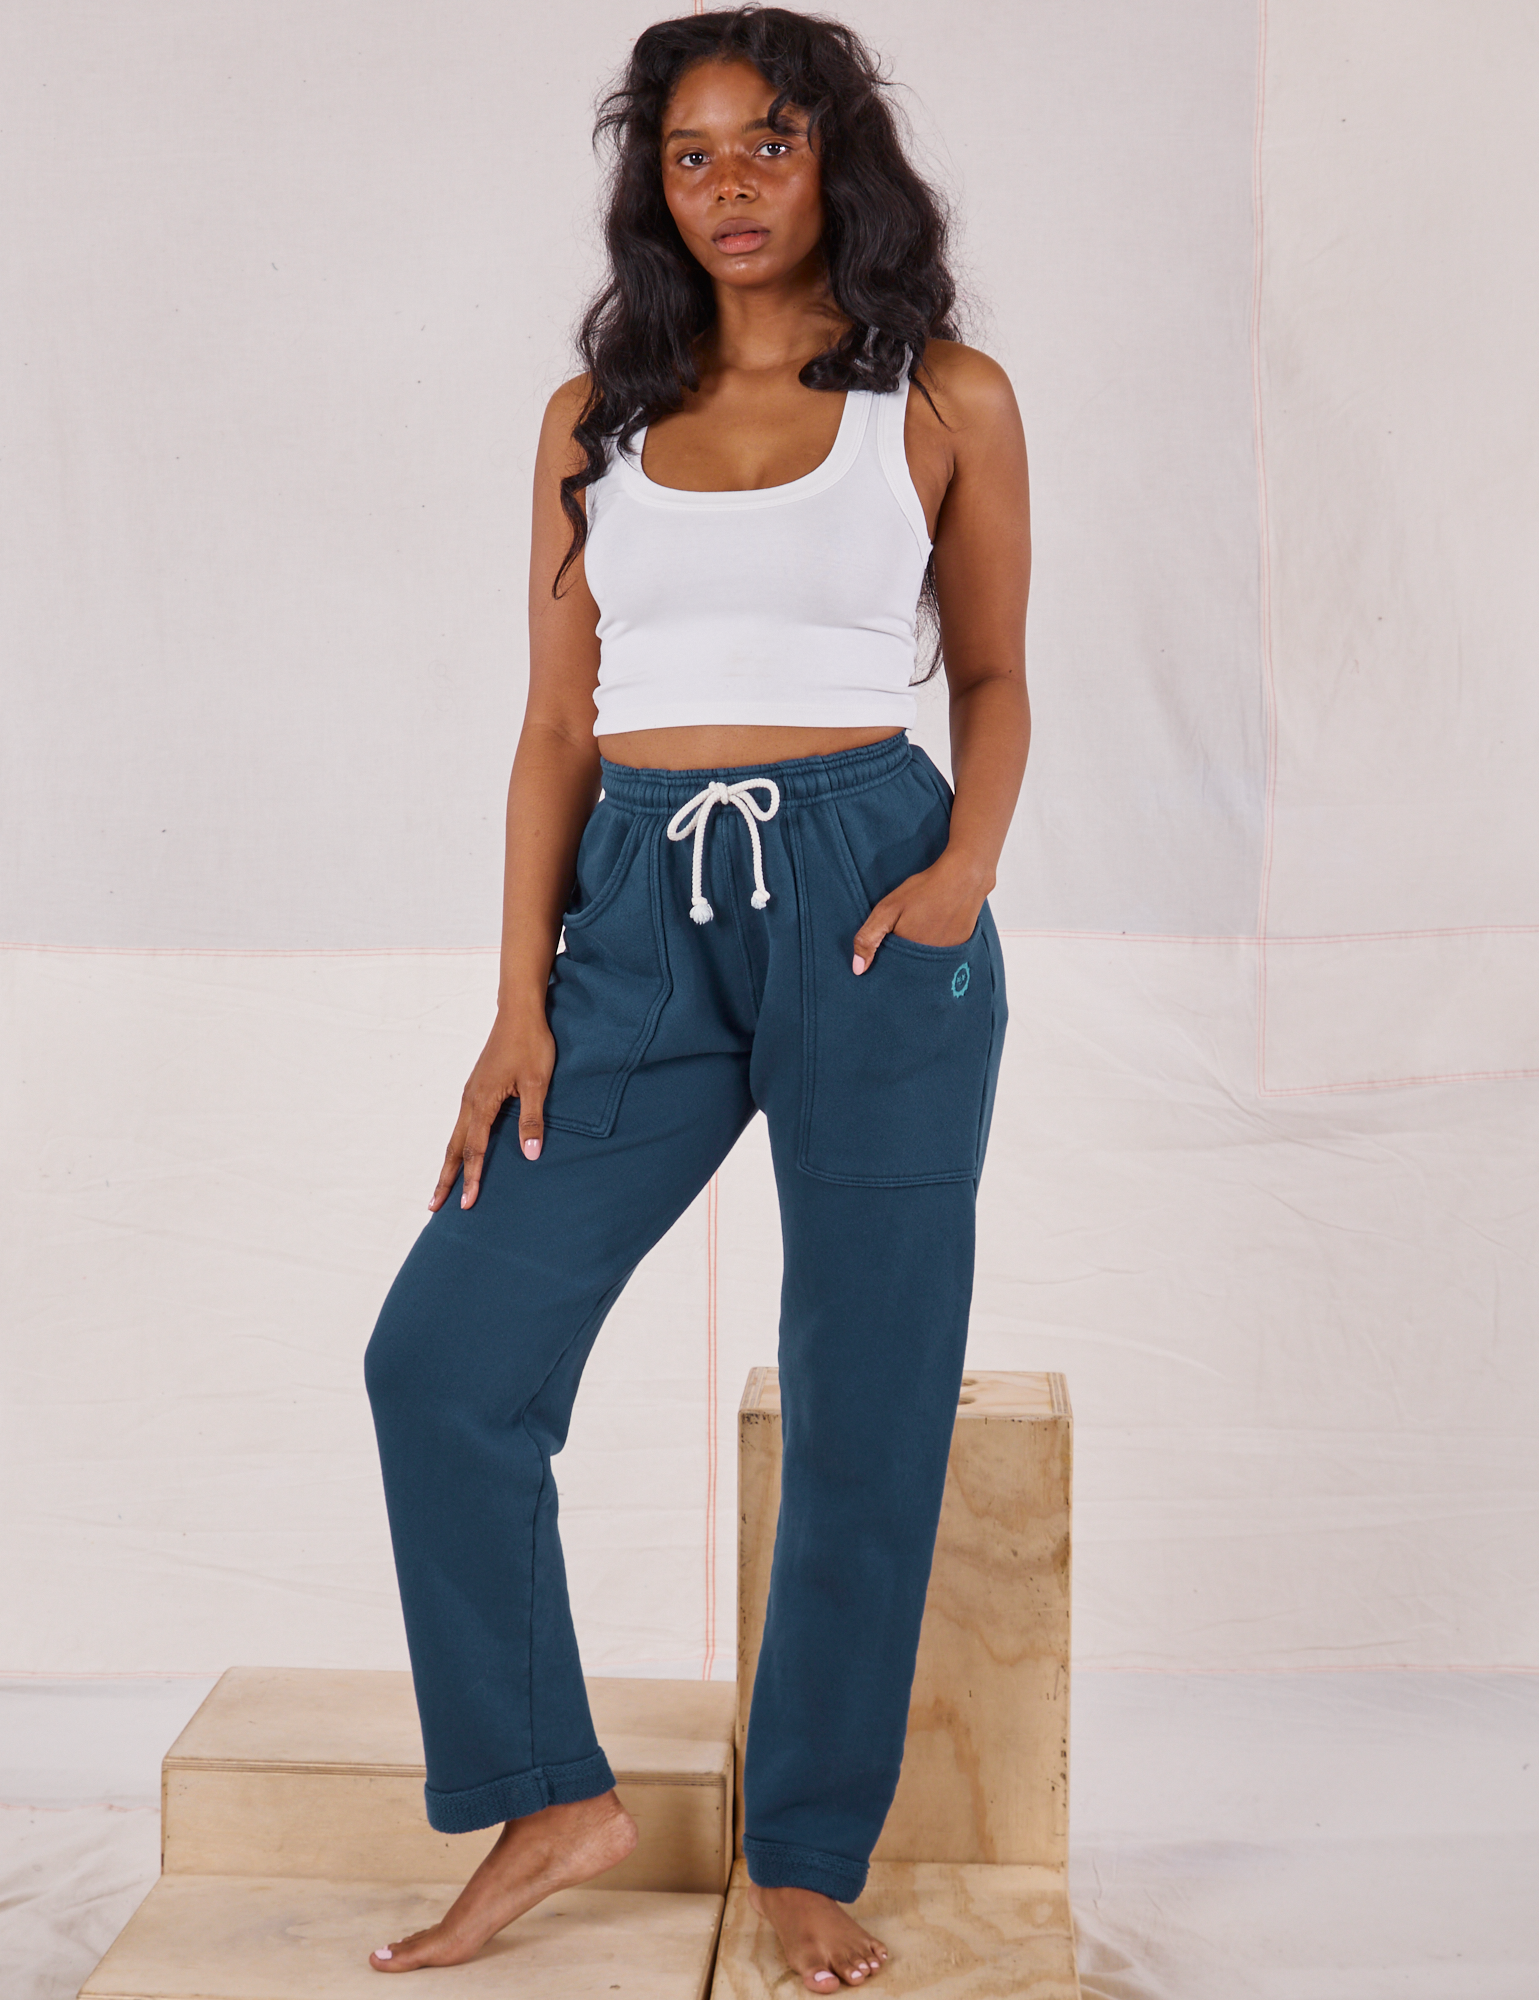 Kandia is 5&#39;3&quot; and wearing P Rolled Cuff Sweat Pants in Lagoon and Cropped Tank in vintage tee off-white